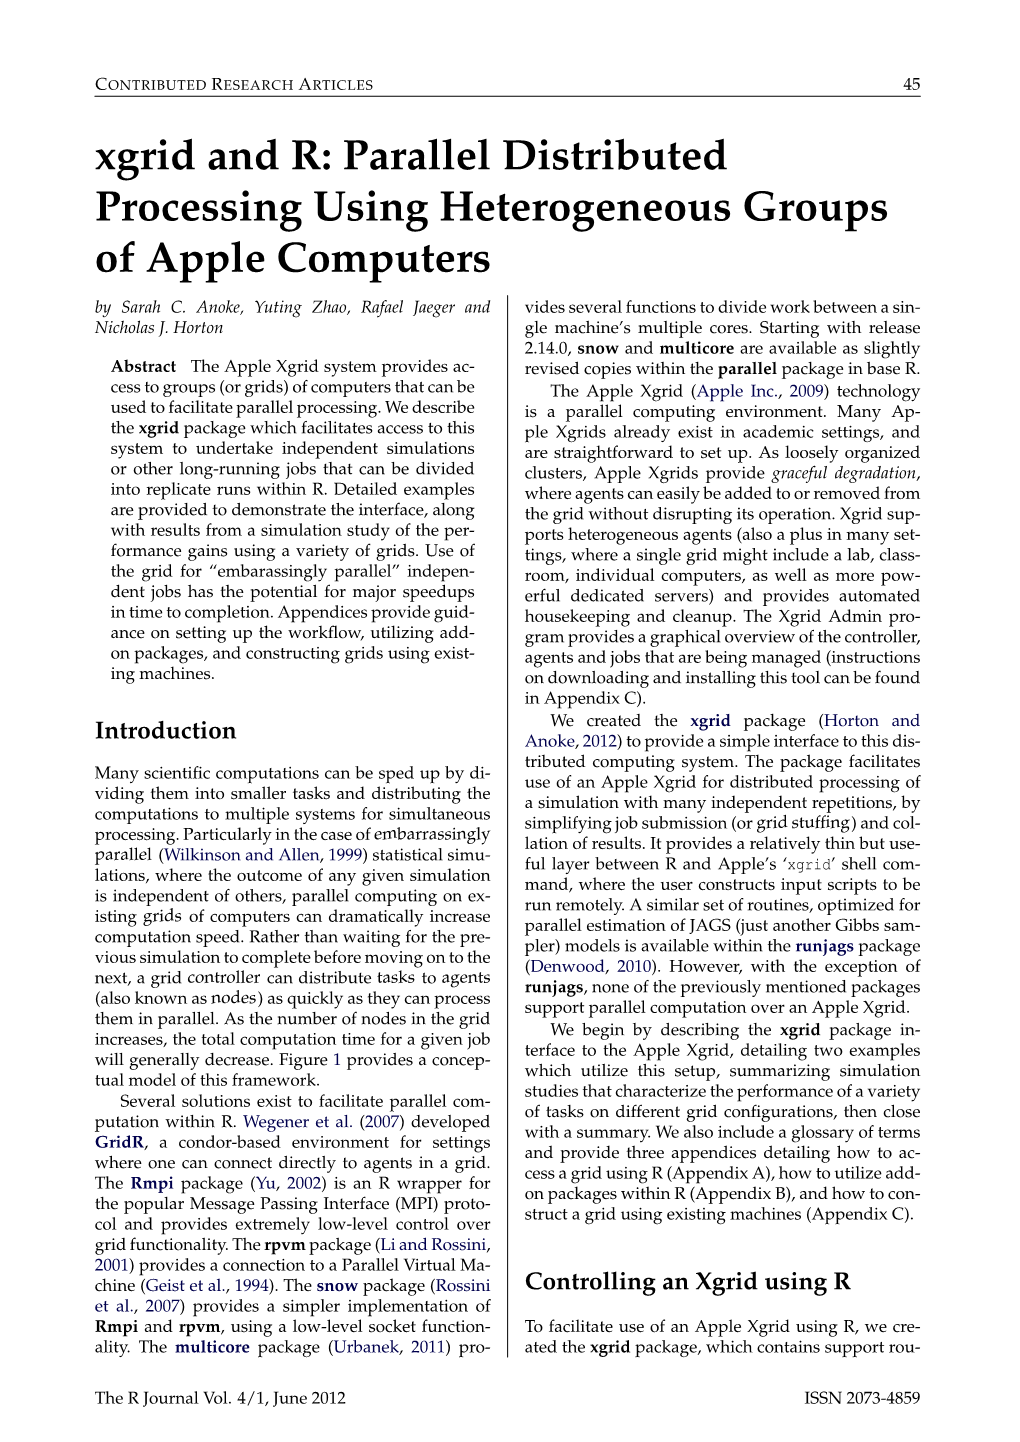 Xgrid and R: Parallel Distributed Processing Using Heterogeneous Groups of Apple Computers by Sarah C